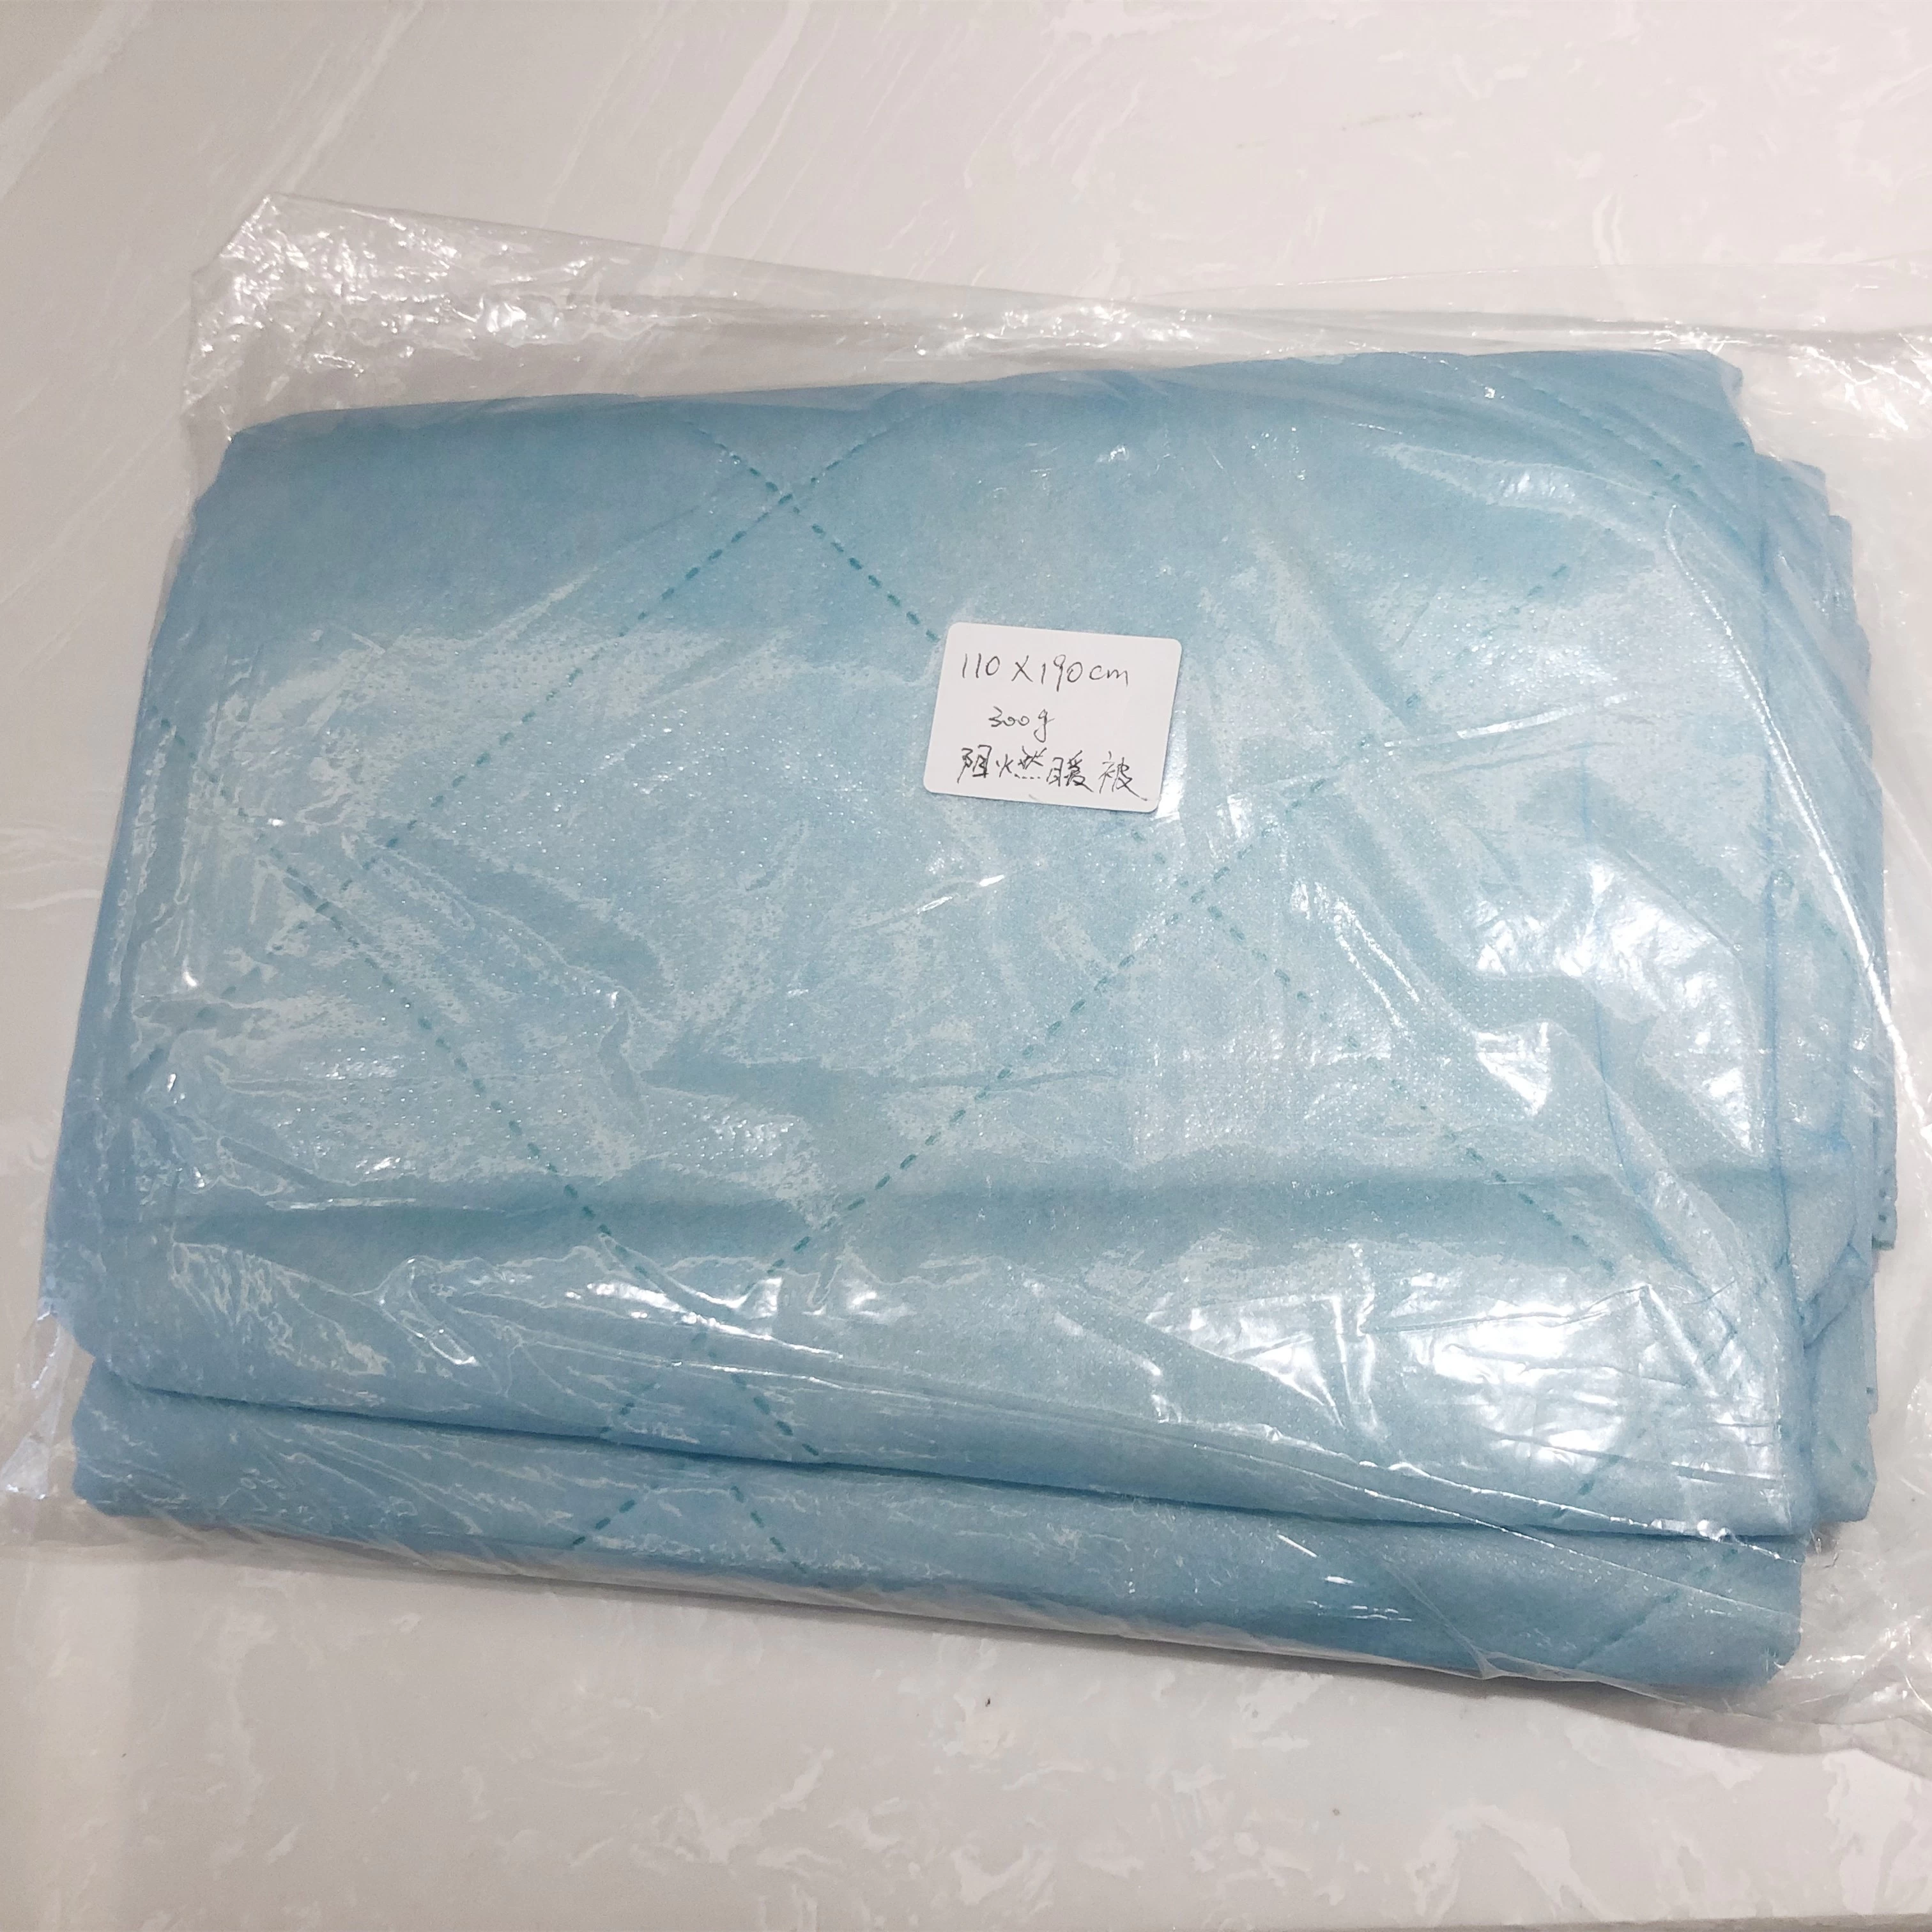 Good quality Disposable non woven medical warming blanket non woven moving blanket